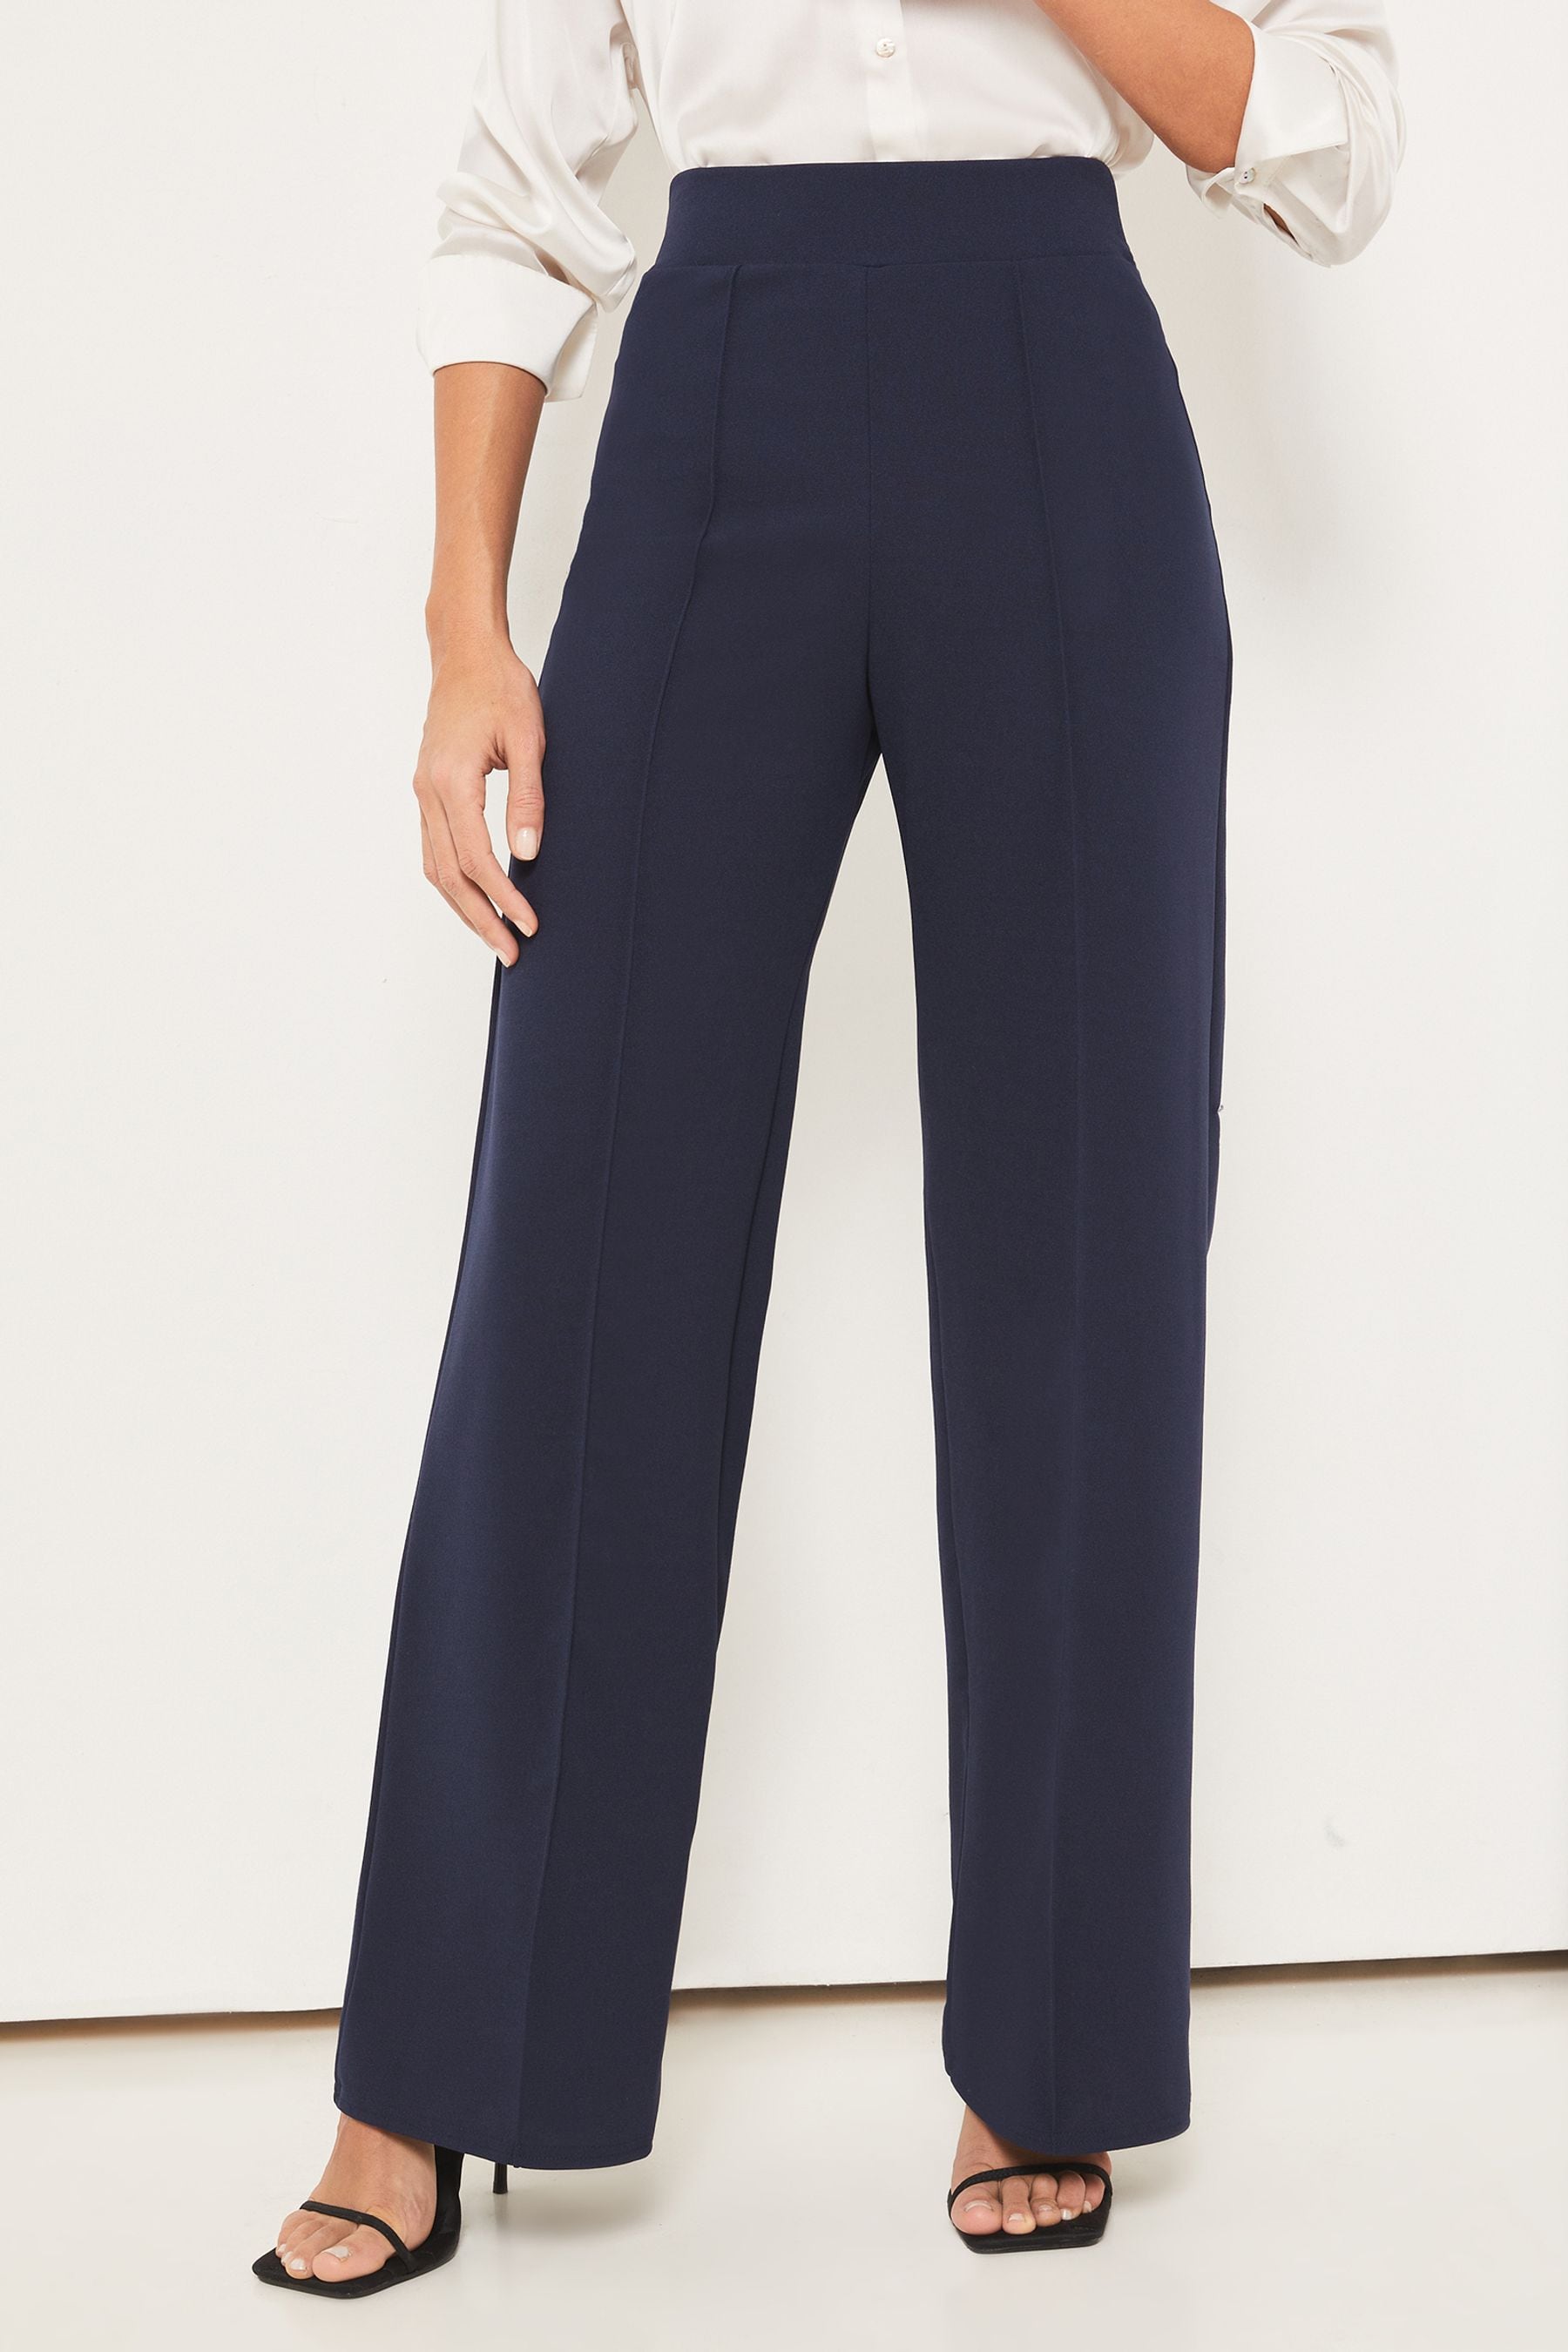 Buy Lipsy High Waist Wide Leg Tailored Trousers from Next Ireland